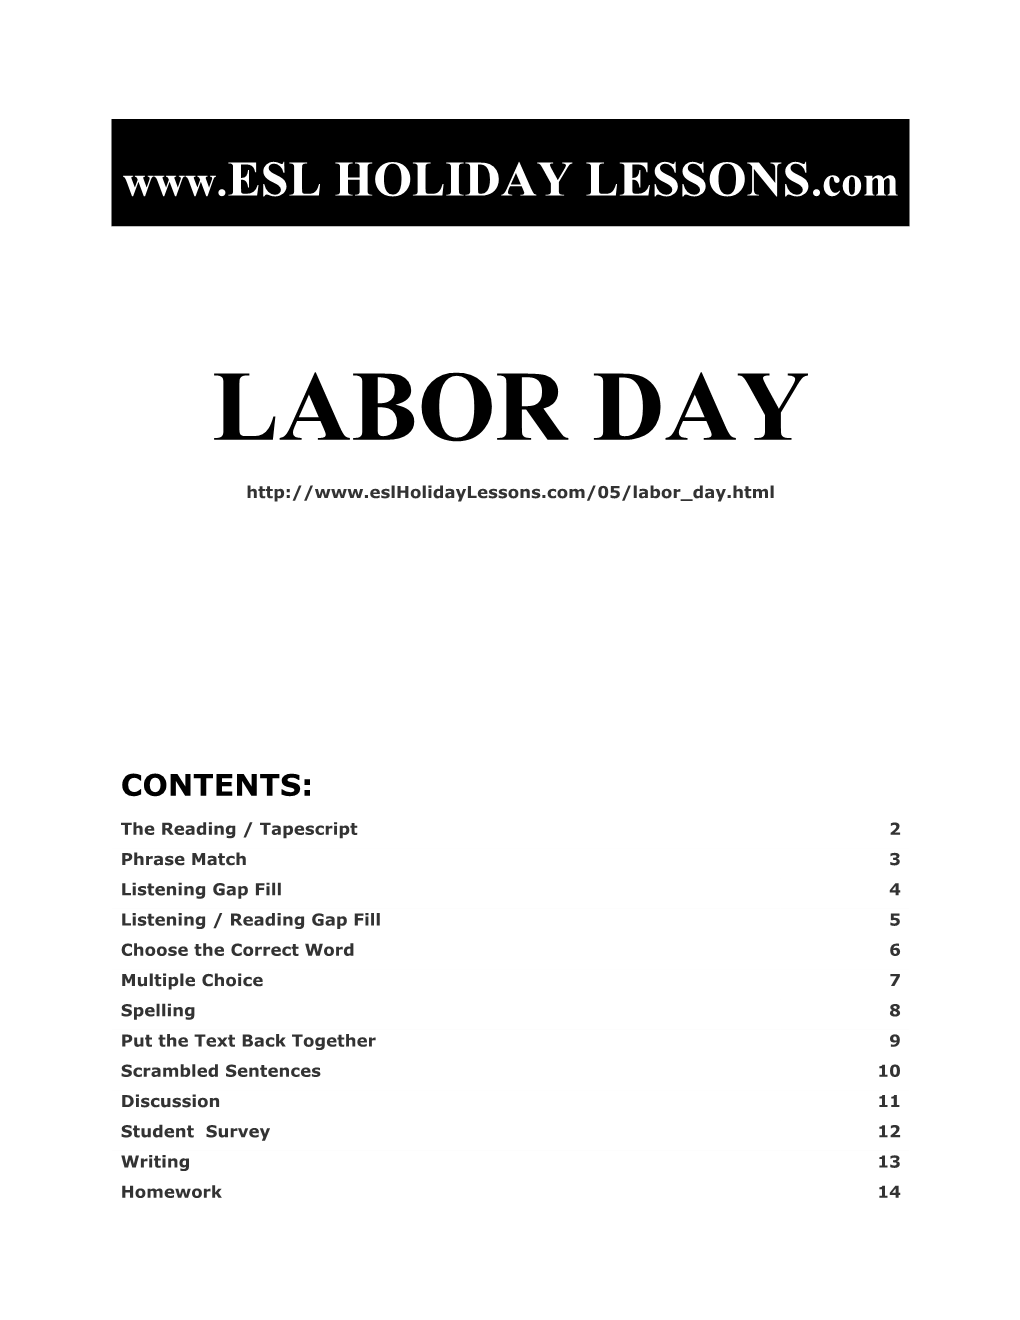 Holiday Lessons - Labor Day s1